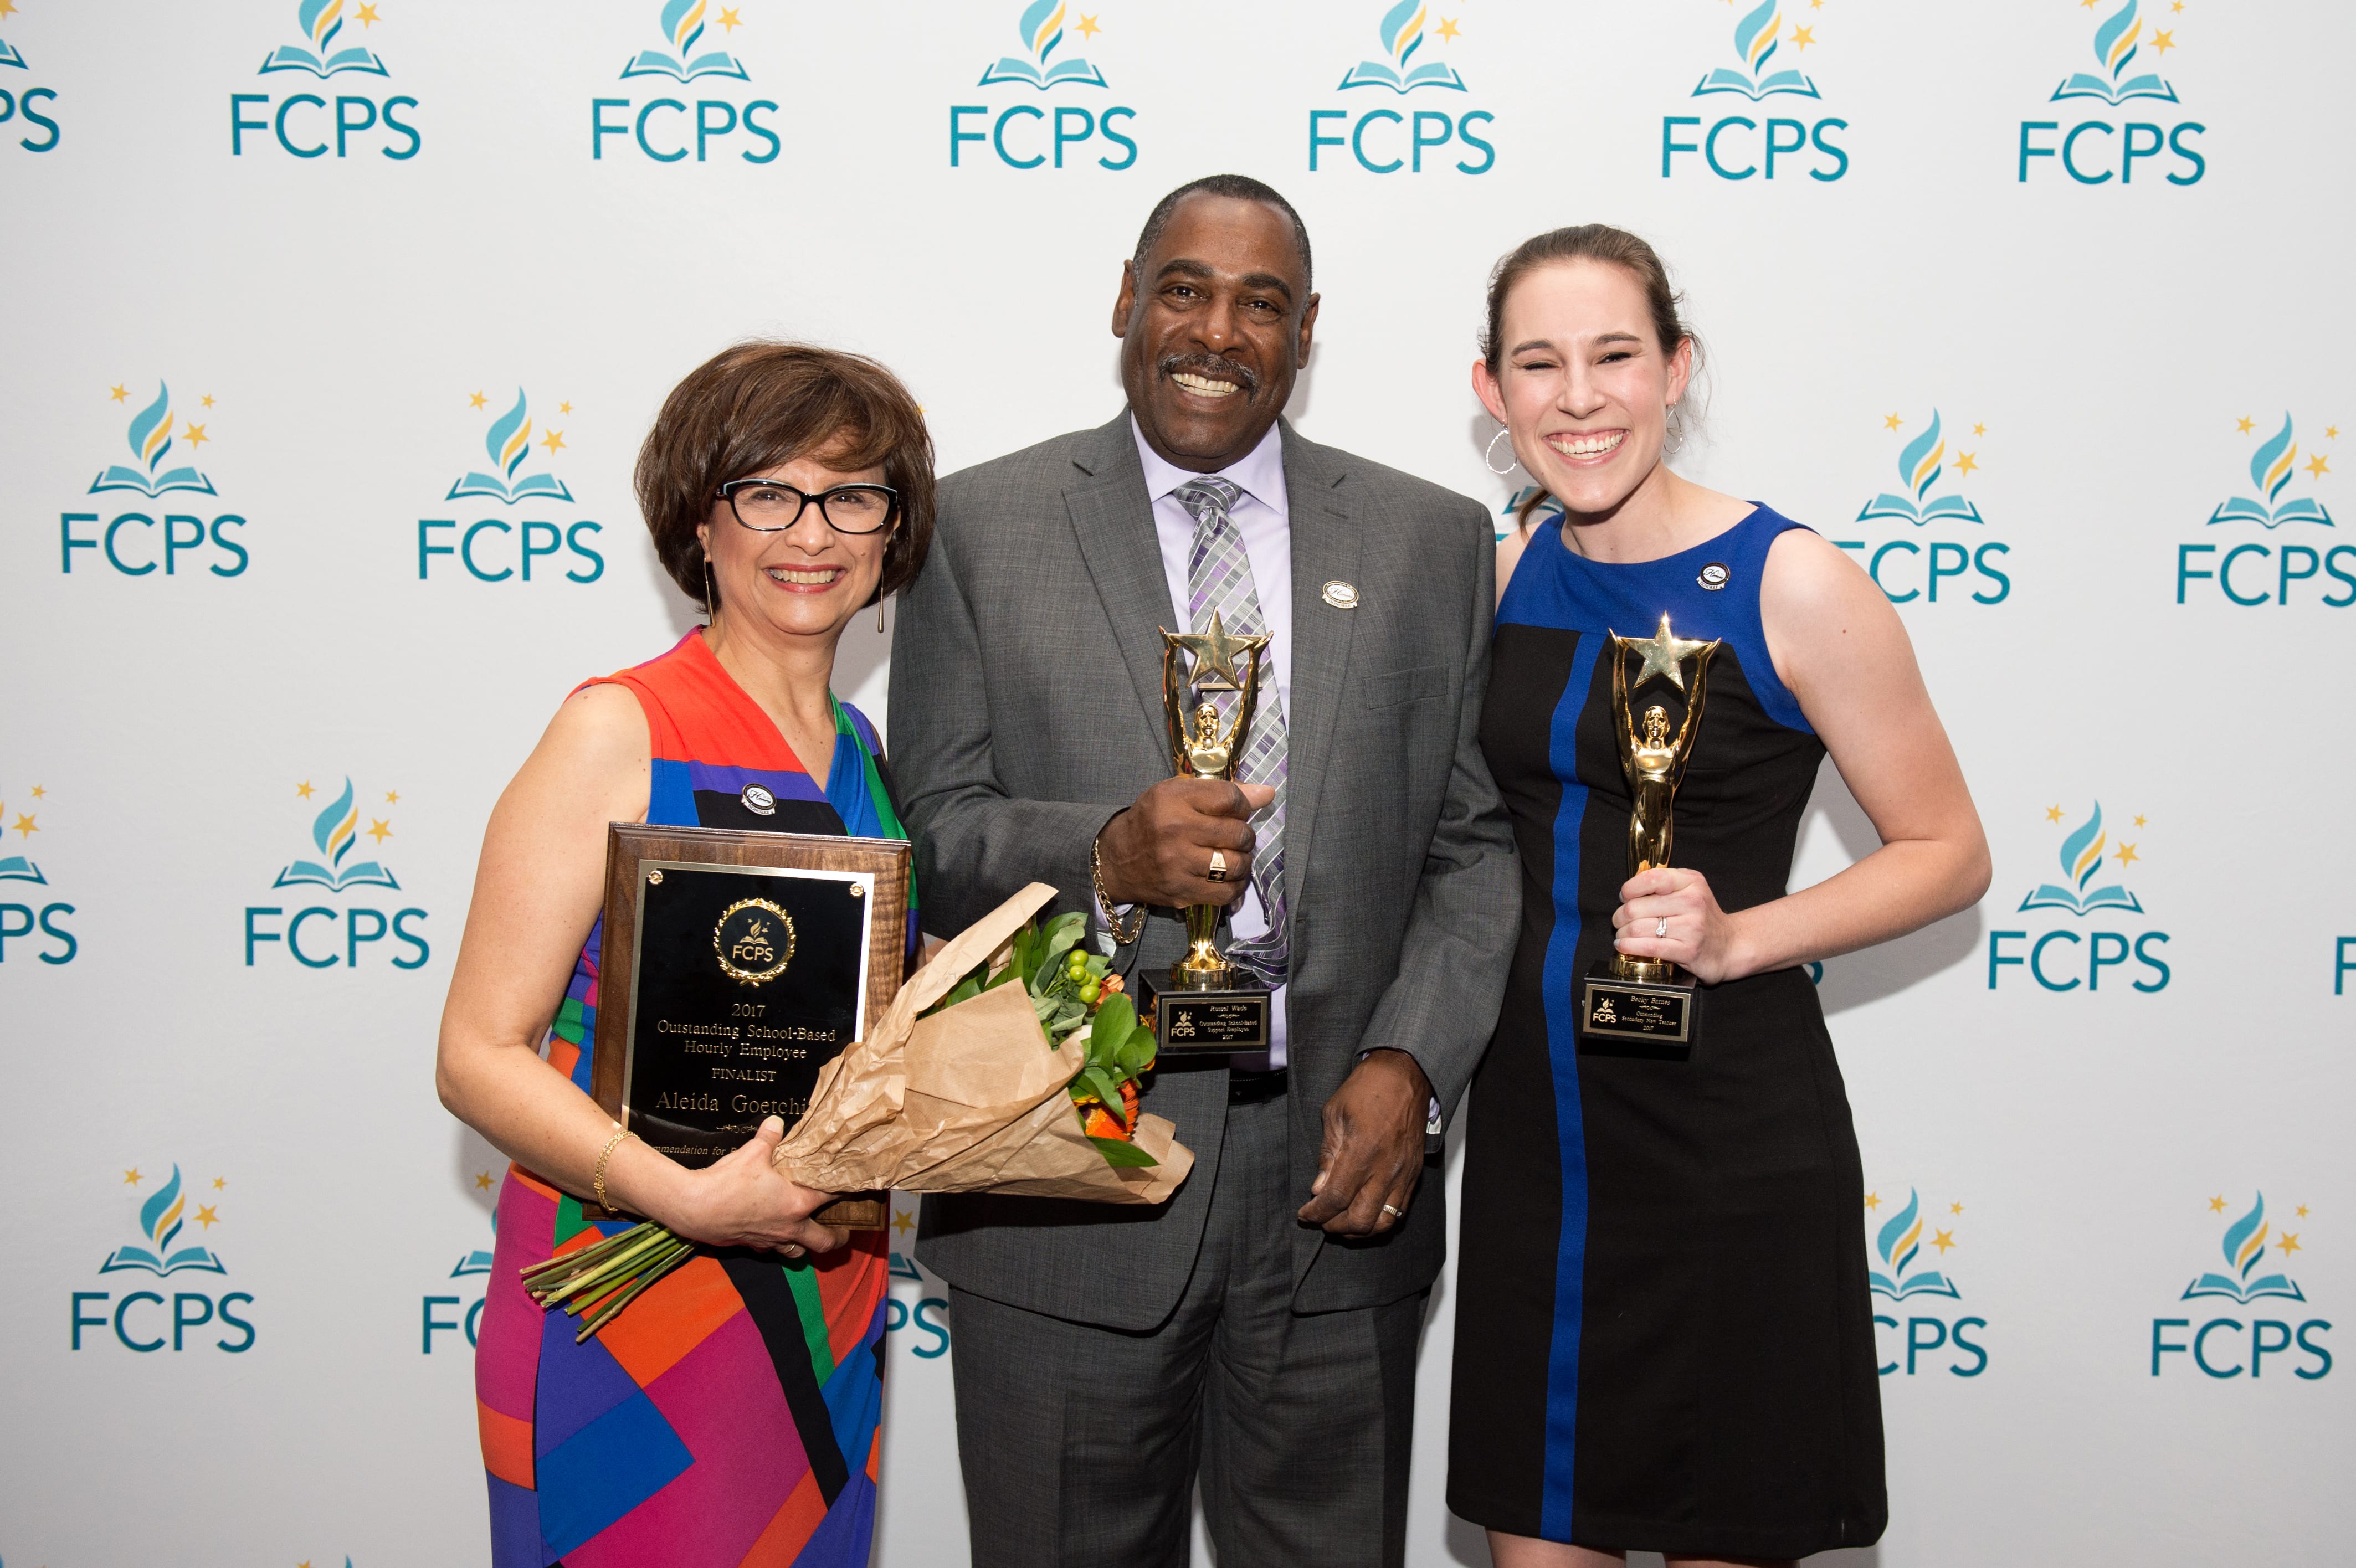 Photo of FCPS Employees at the FCPS Honors event